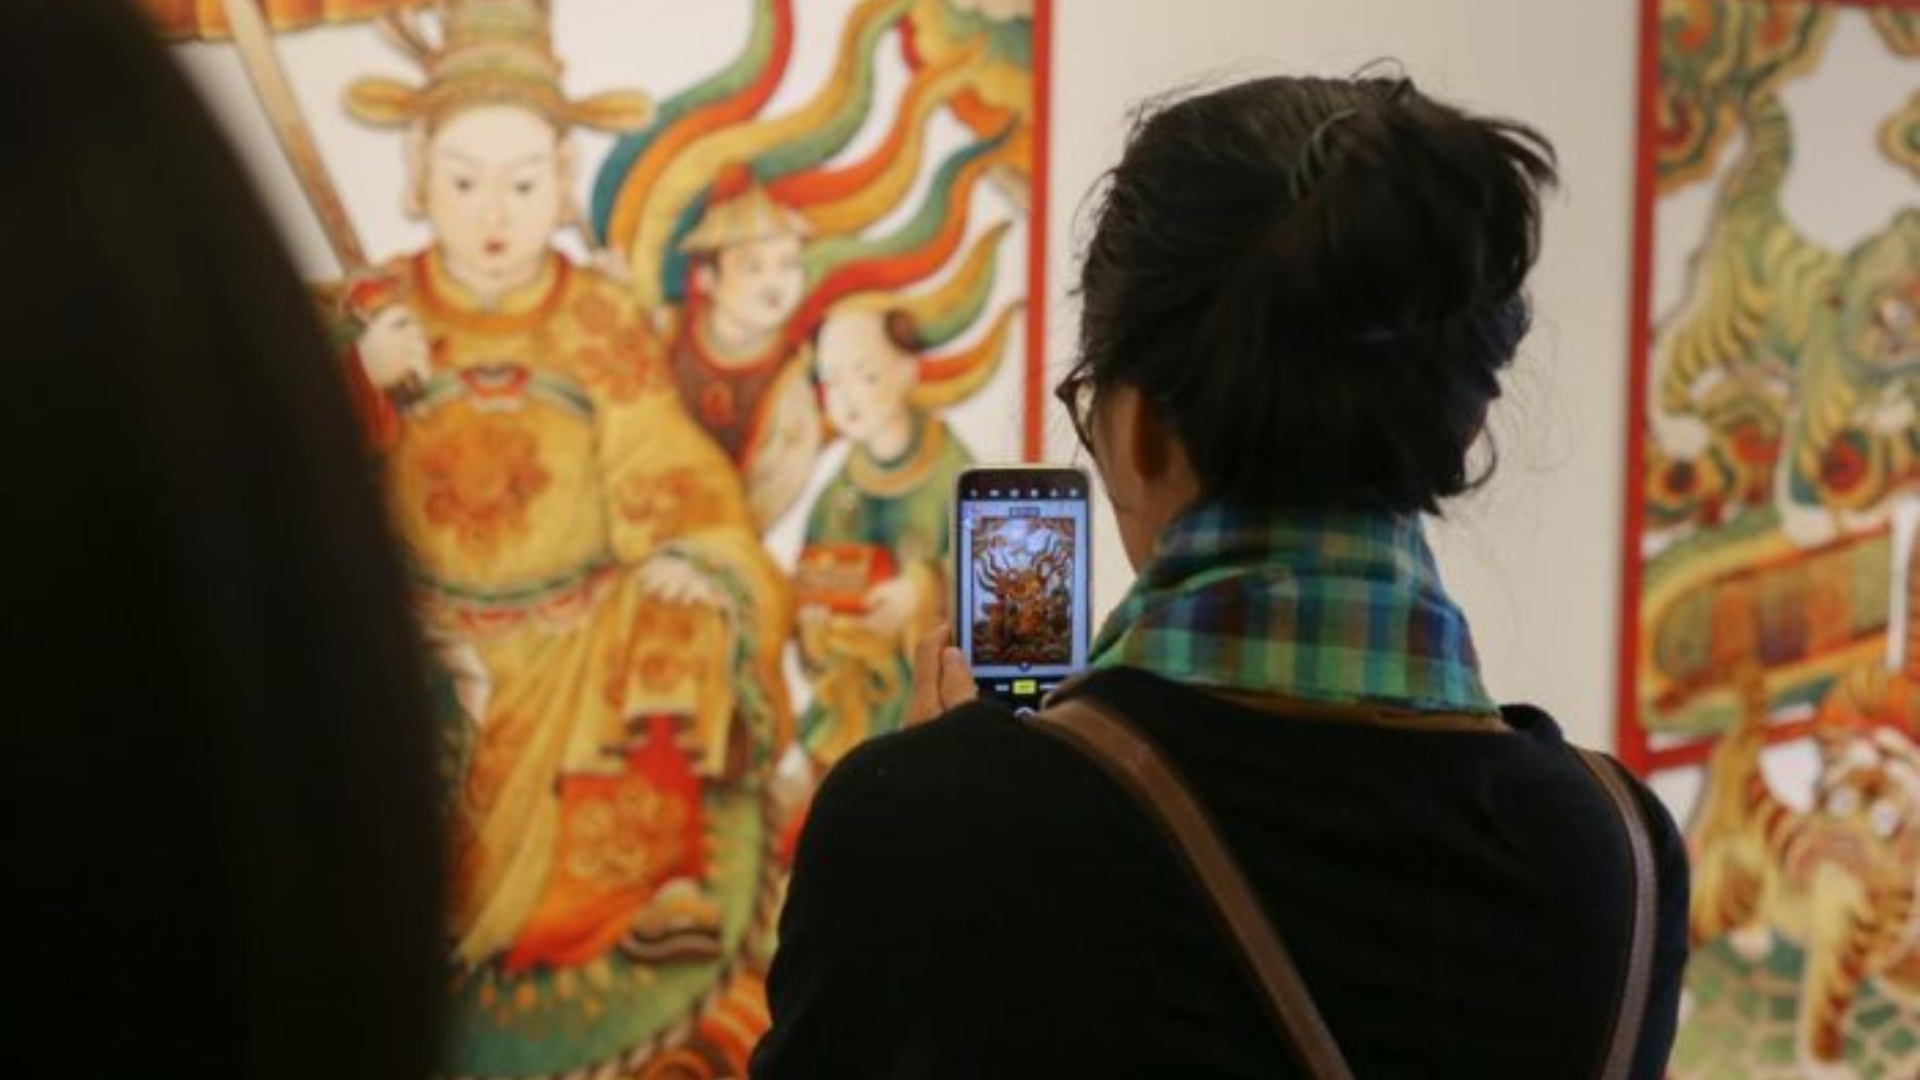 The temporary exhibitions are a great way to learn about Vietnamese women